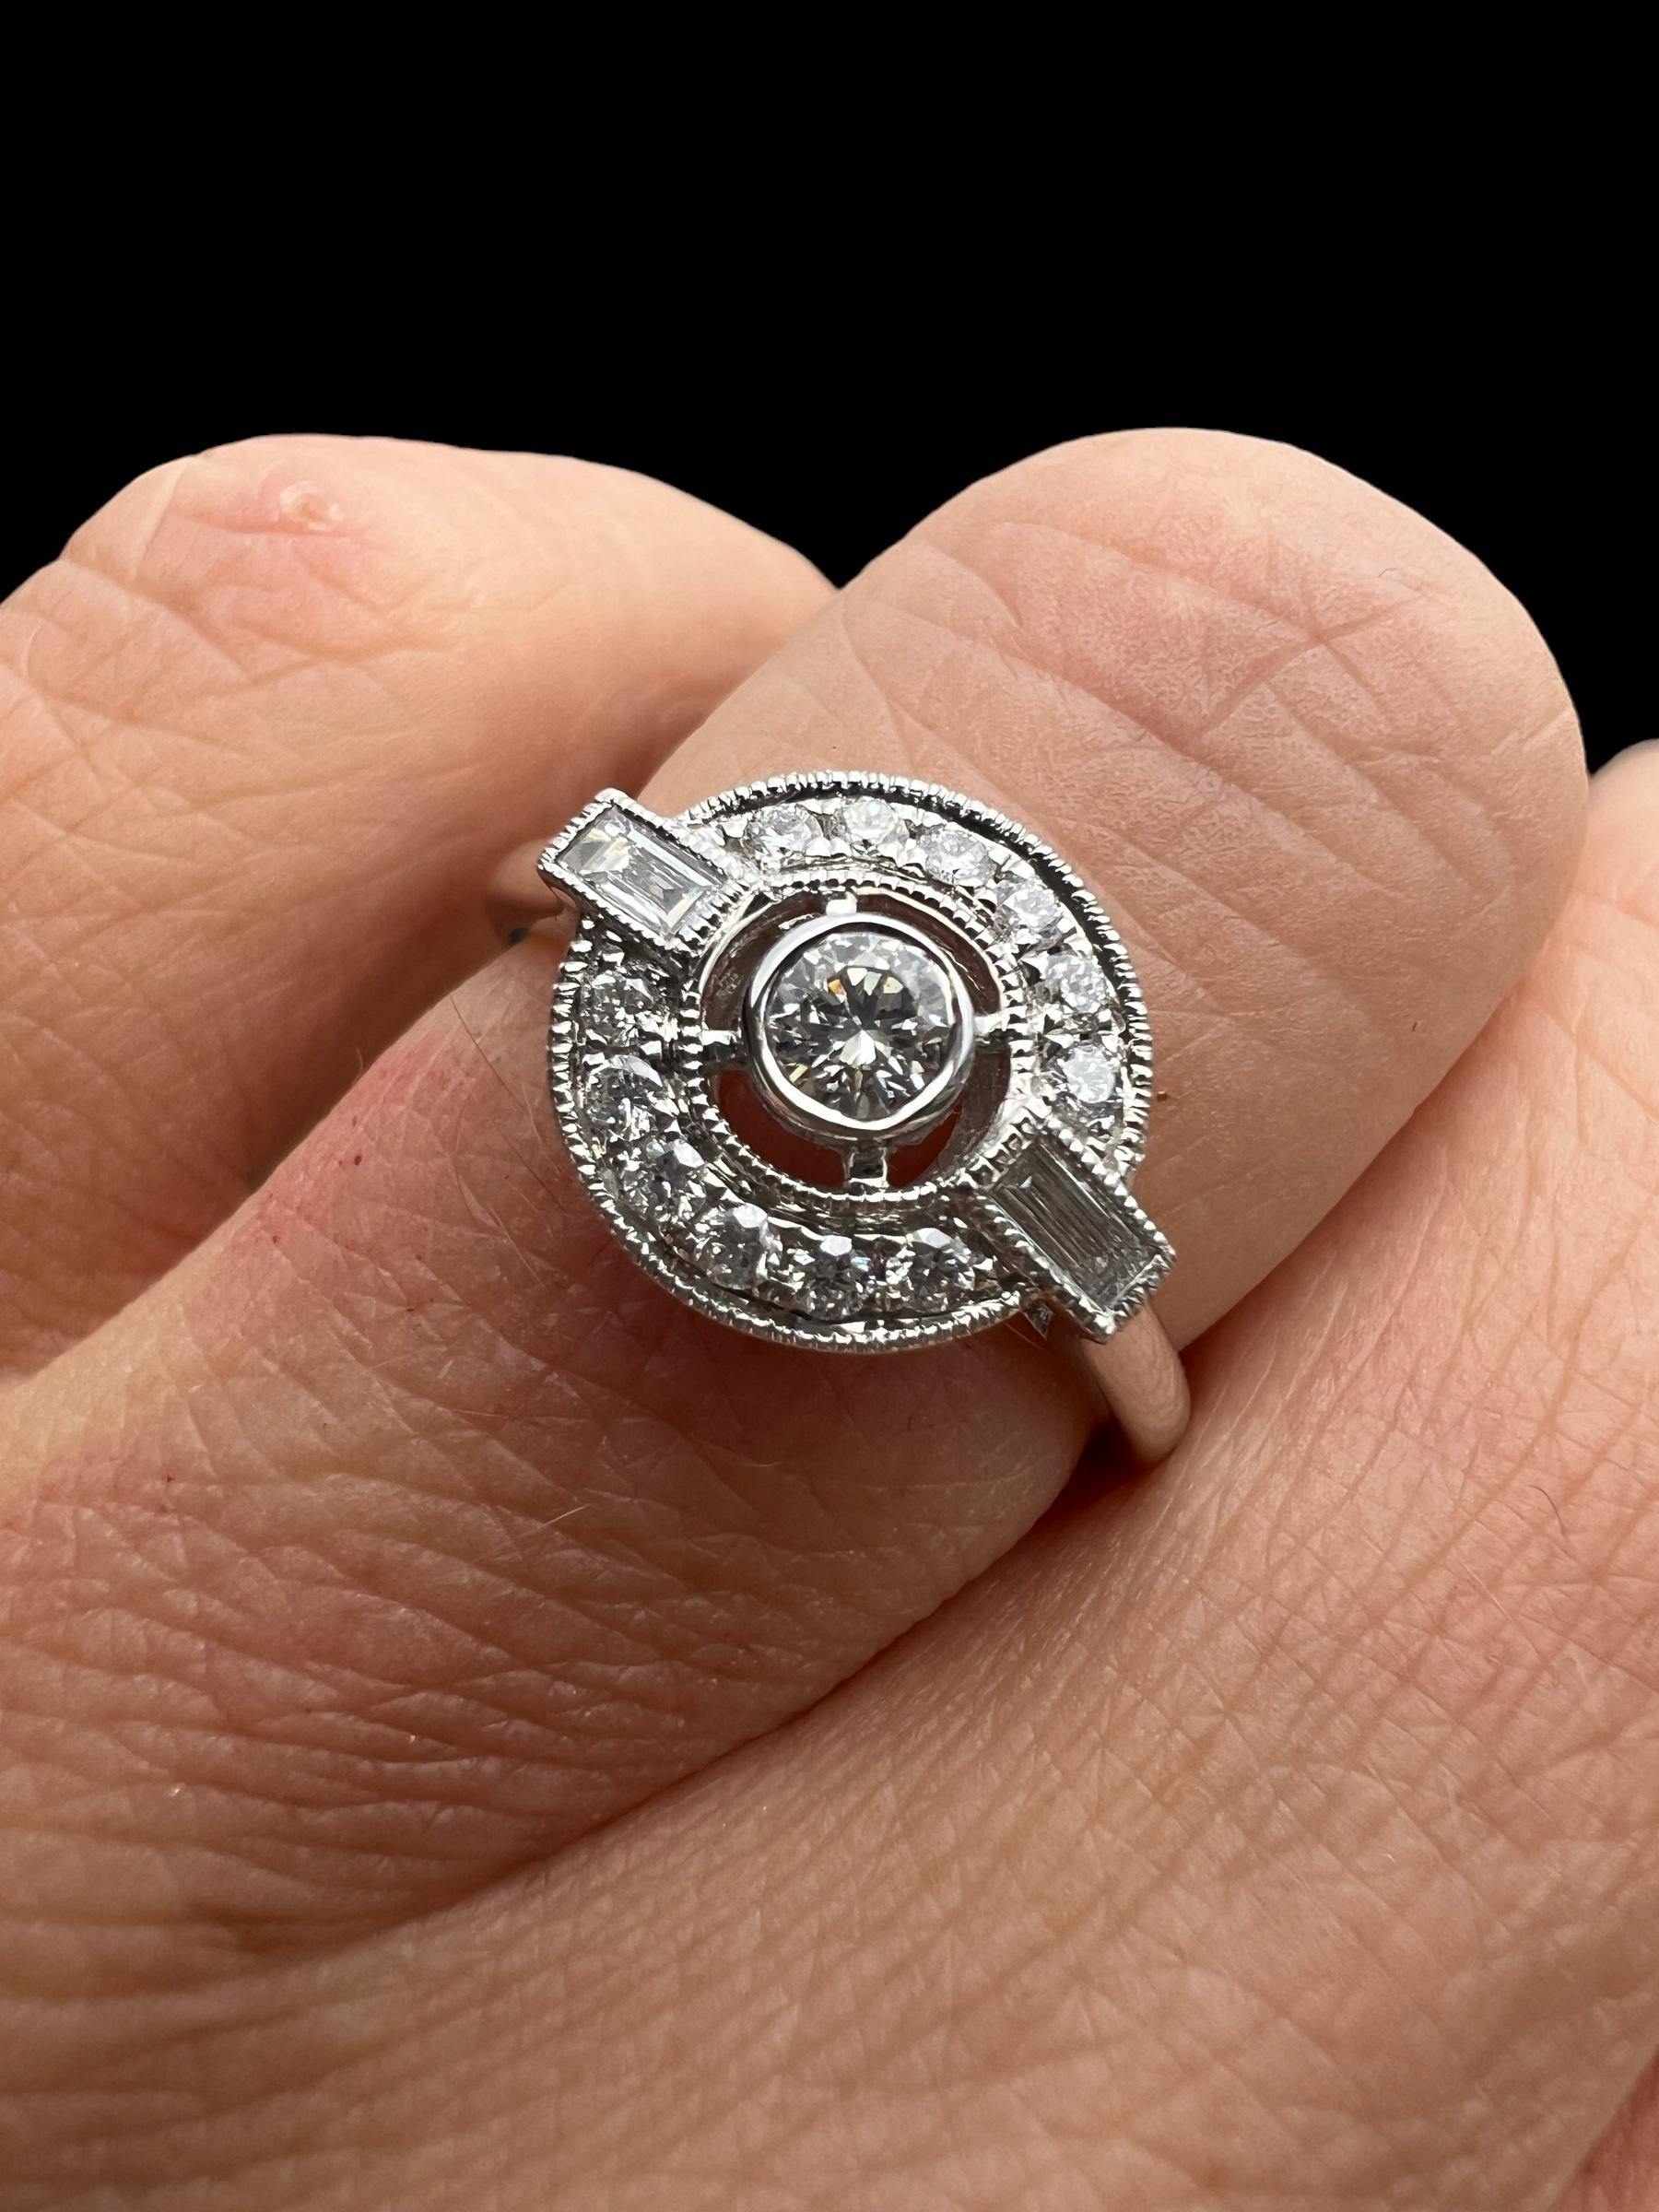 Art Deco 18-Carat White Gold Ring Set With A Paving Of Diamonds